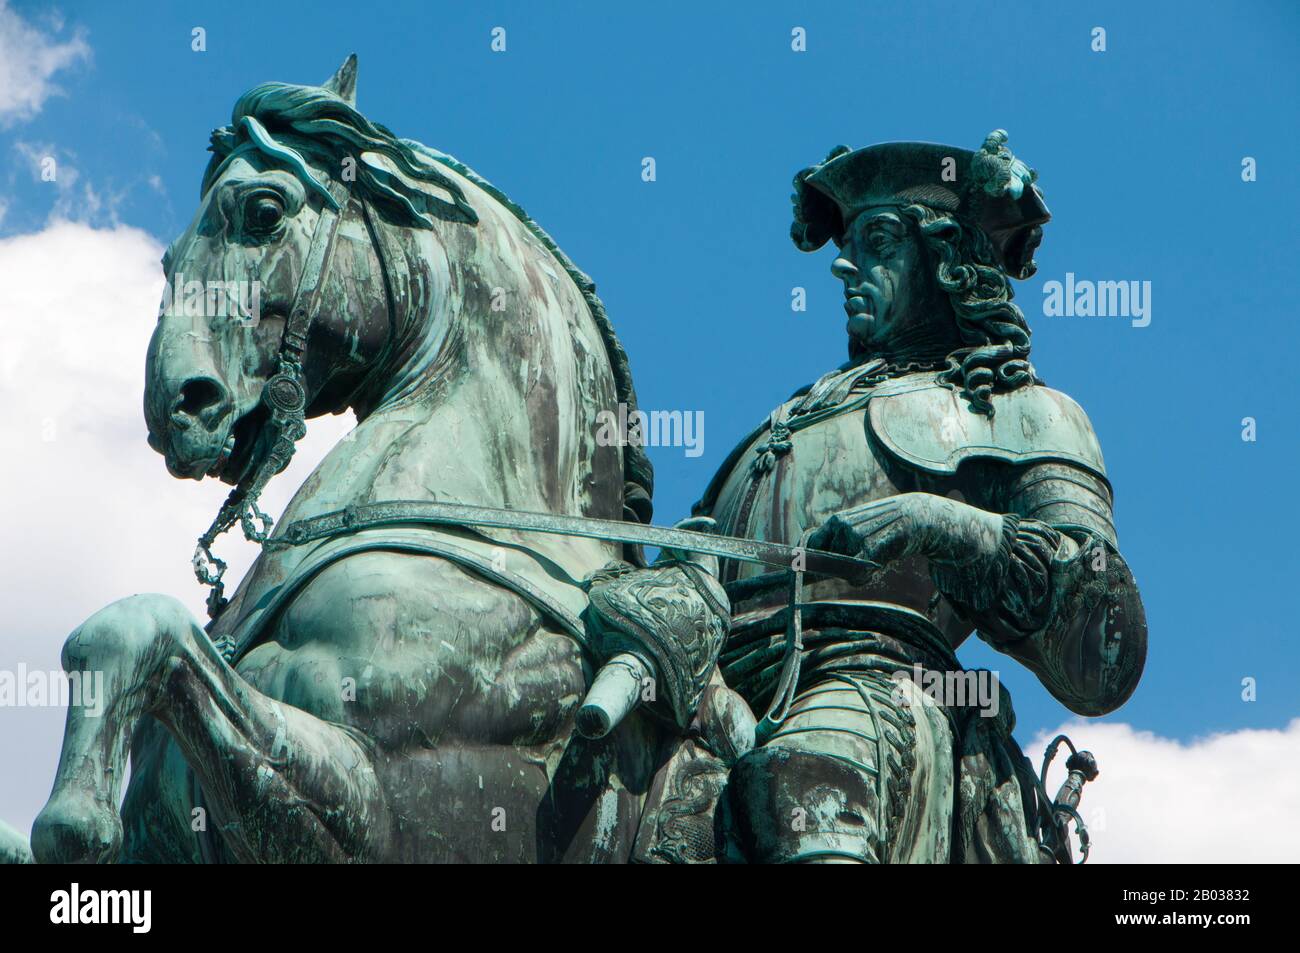 Austria: Prince Eugene of Savoy (1663 -1736), general and statesman of the Holy Roman Empire, equestrian statue in Heldenplatz, Vienna. Prince Eugene of Savoy (Prinz Eugen von Savoyen; 18 October 1663 – 21 April 1736) was a general of the Imperial Army and statesman of the Holy Roman Empire and the Archduchy of Austria and one of the most successful military commanders in modern European history, rising to the highest offices of state at the Imperial court in Vienna. Stock Photo